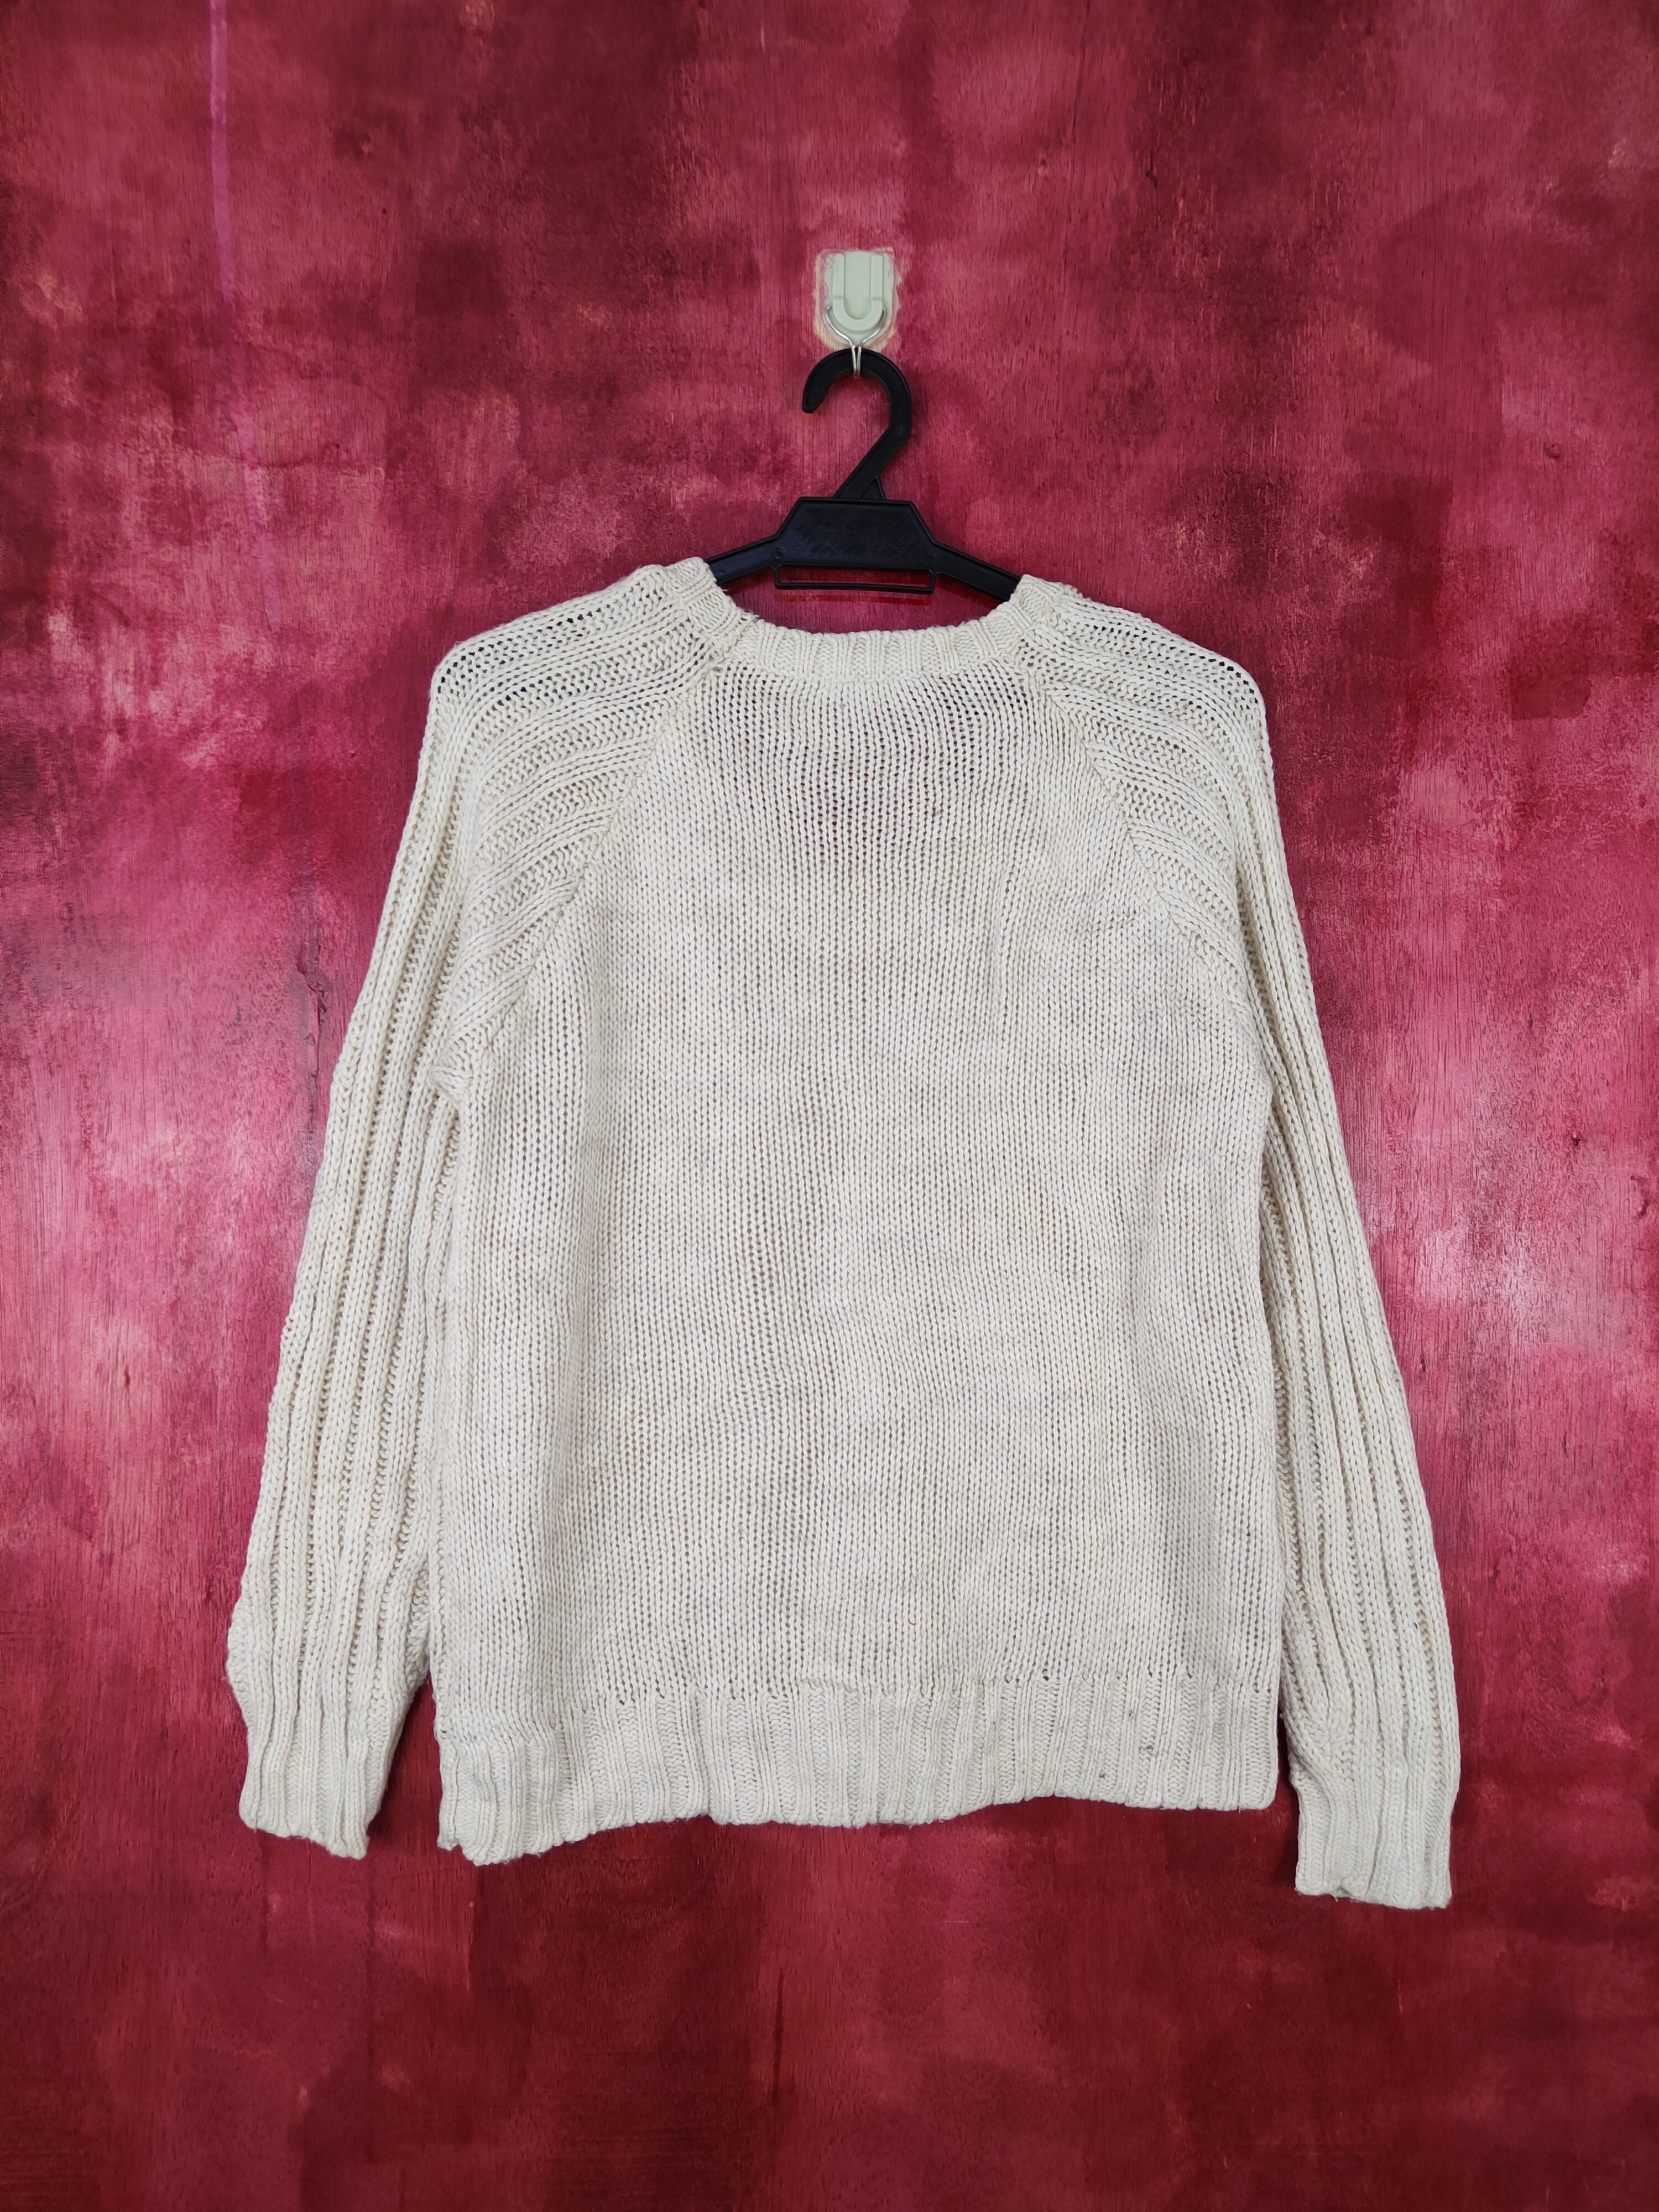 Japanese Brand - Archives White Knitwear Sweater Damage With Stain - 7